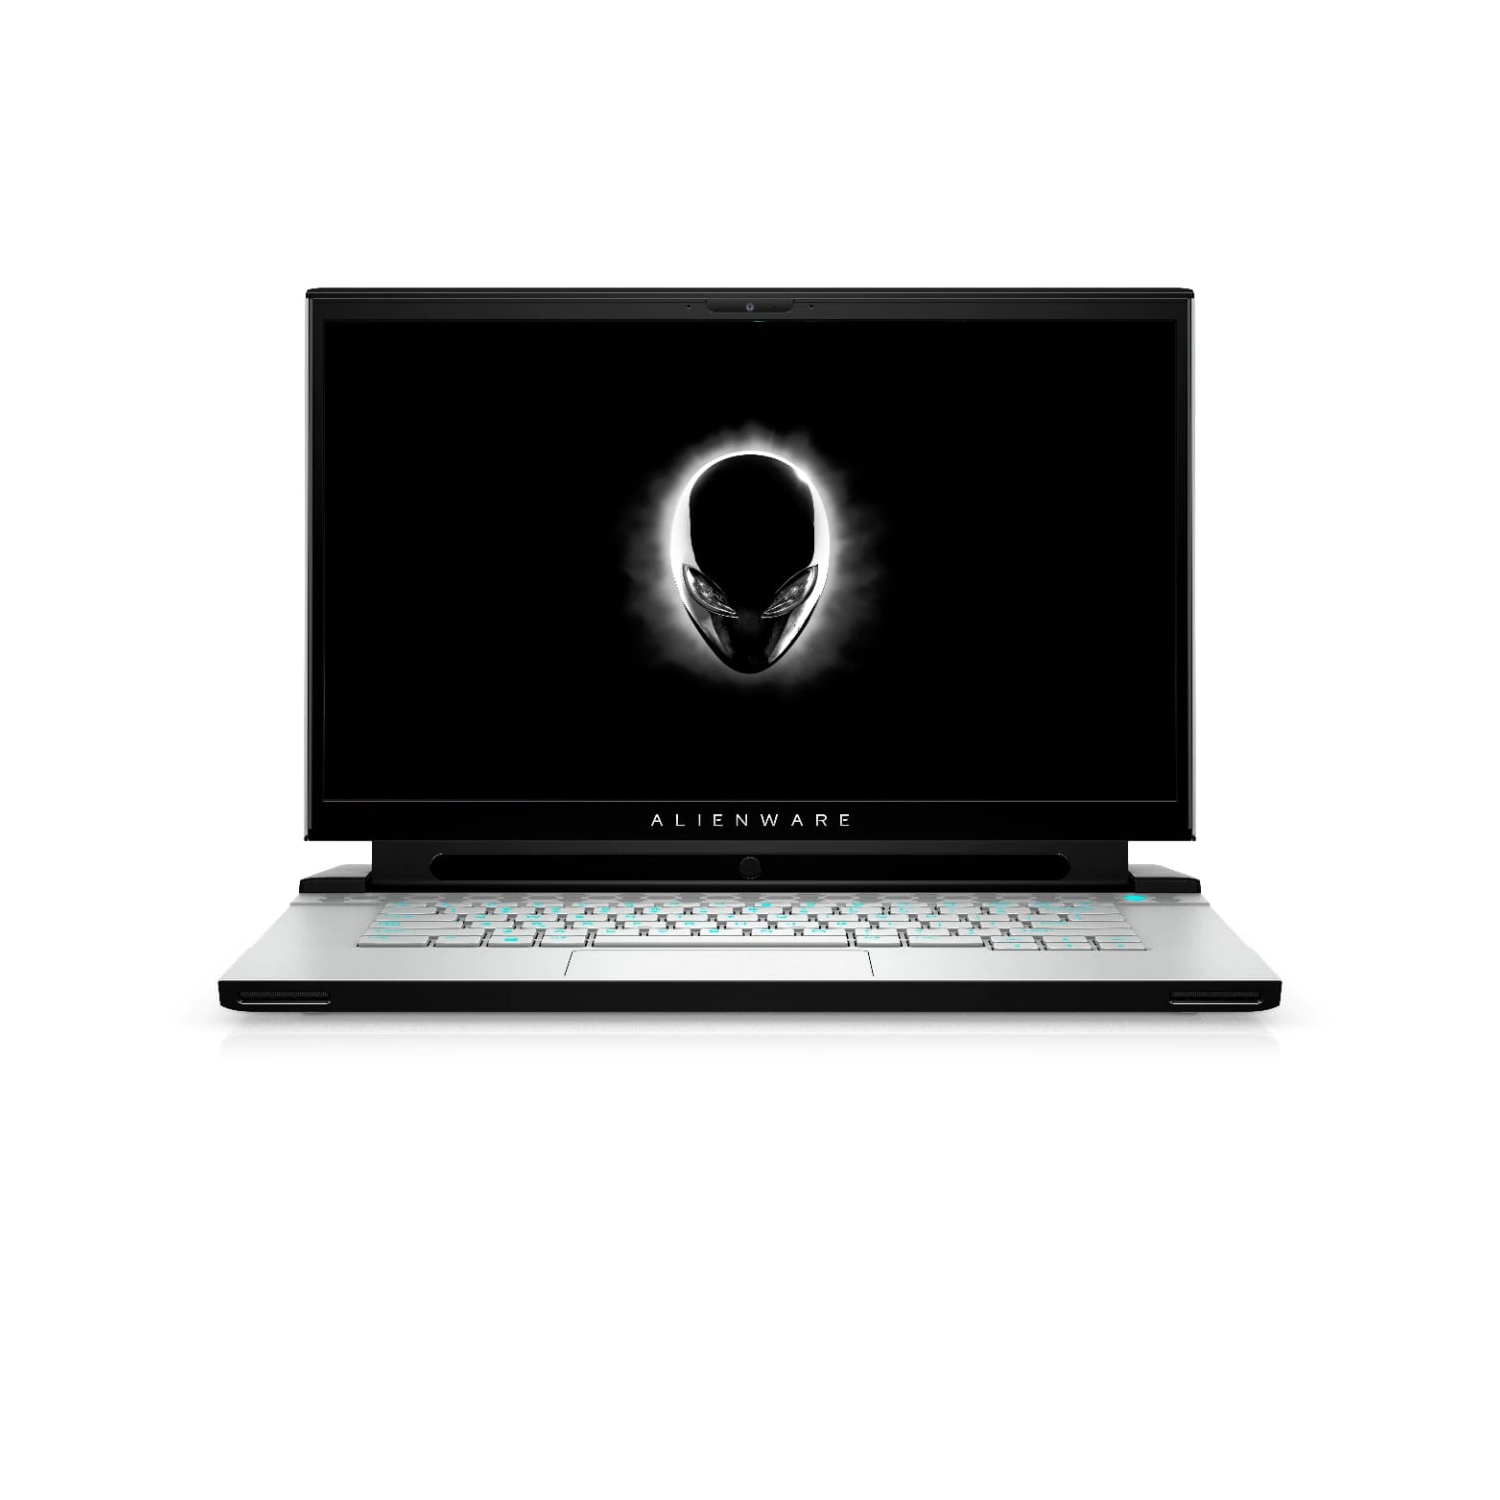 Refurbished (Excellent) - Dell Alienware m15 R3 Gaming Laptop (2020), 15.6" FHD, Core i7, 1TB SSD, 32GB RAM, RTX 2070, 8 Cores @ 5.1 GHz, 10th Gen CPU Certified